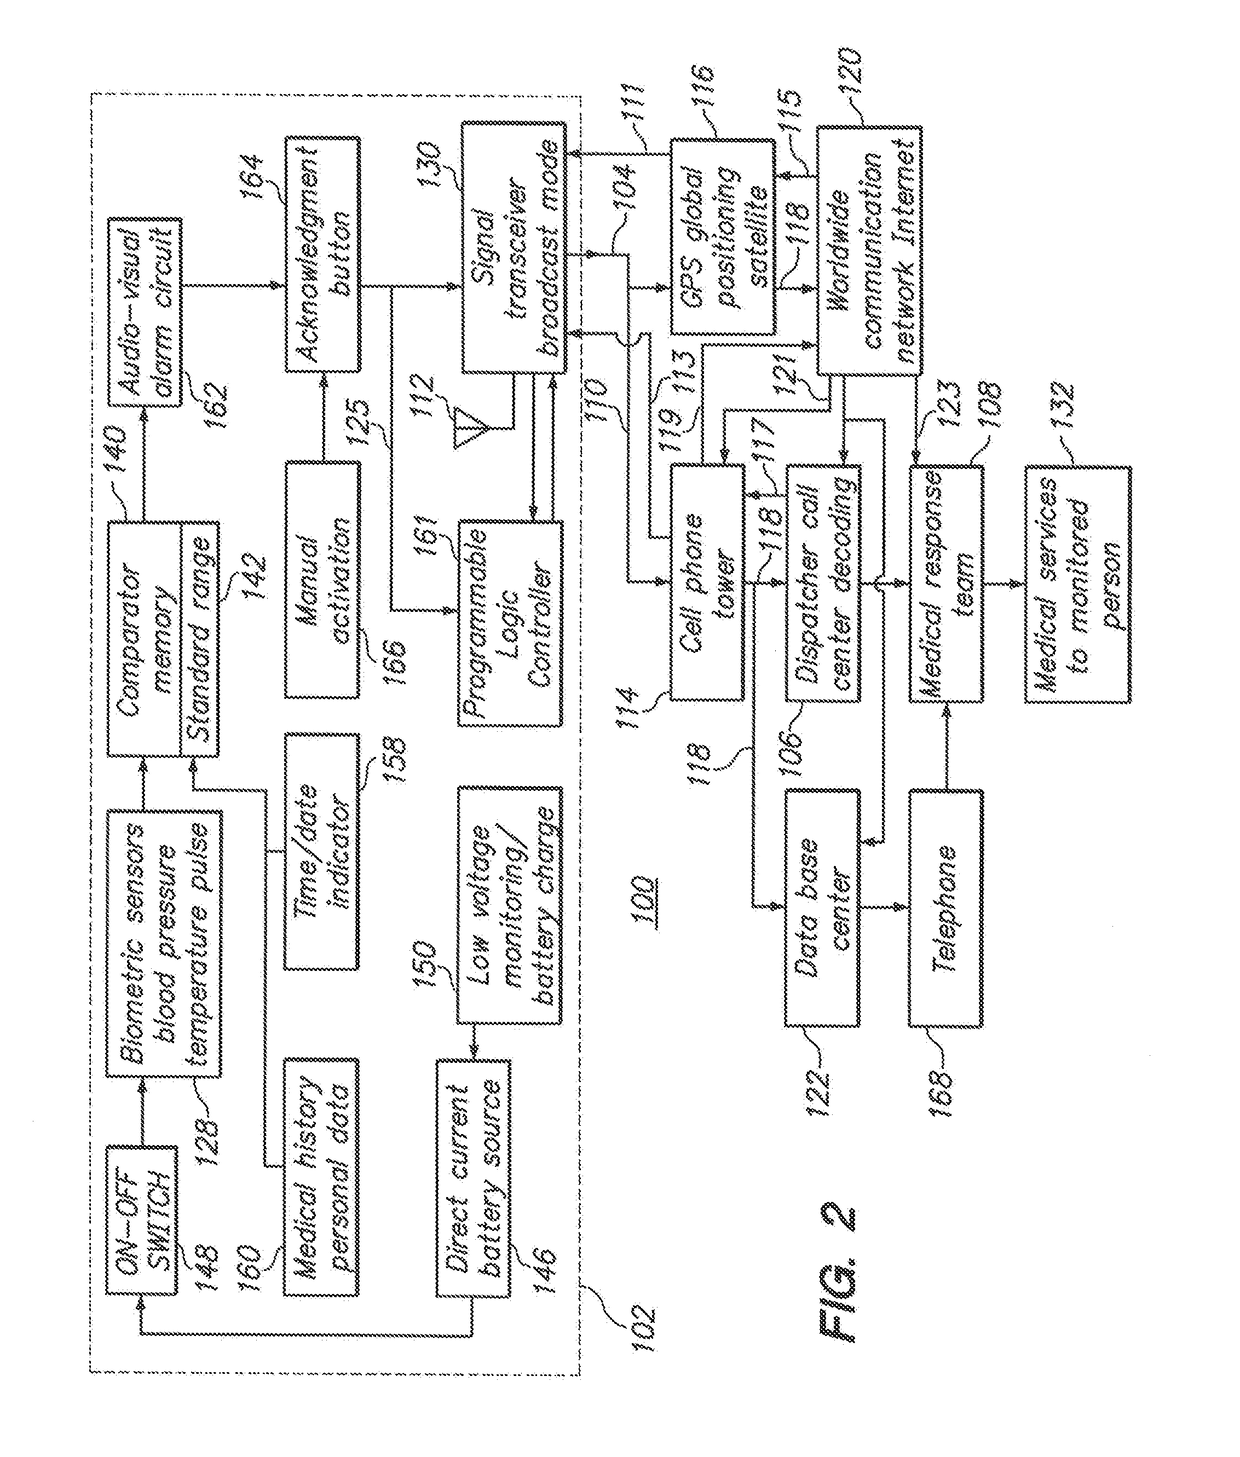 Personal Monitoring And Emergency Communications System And Method